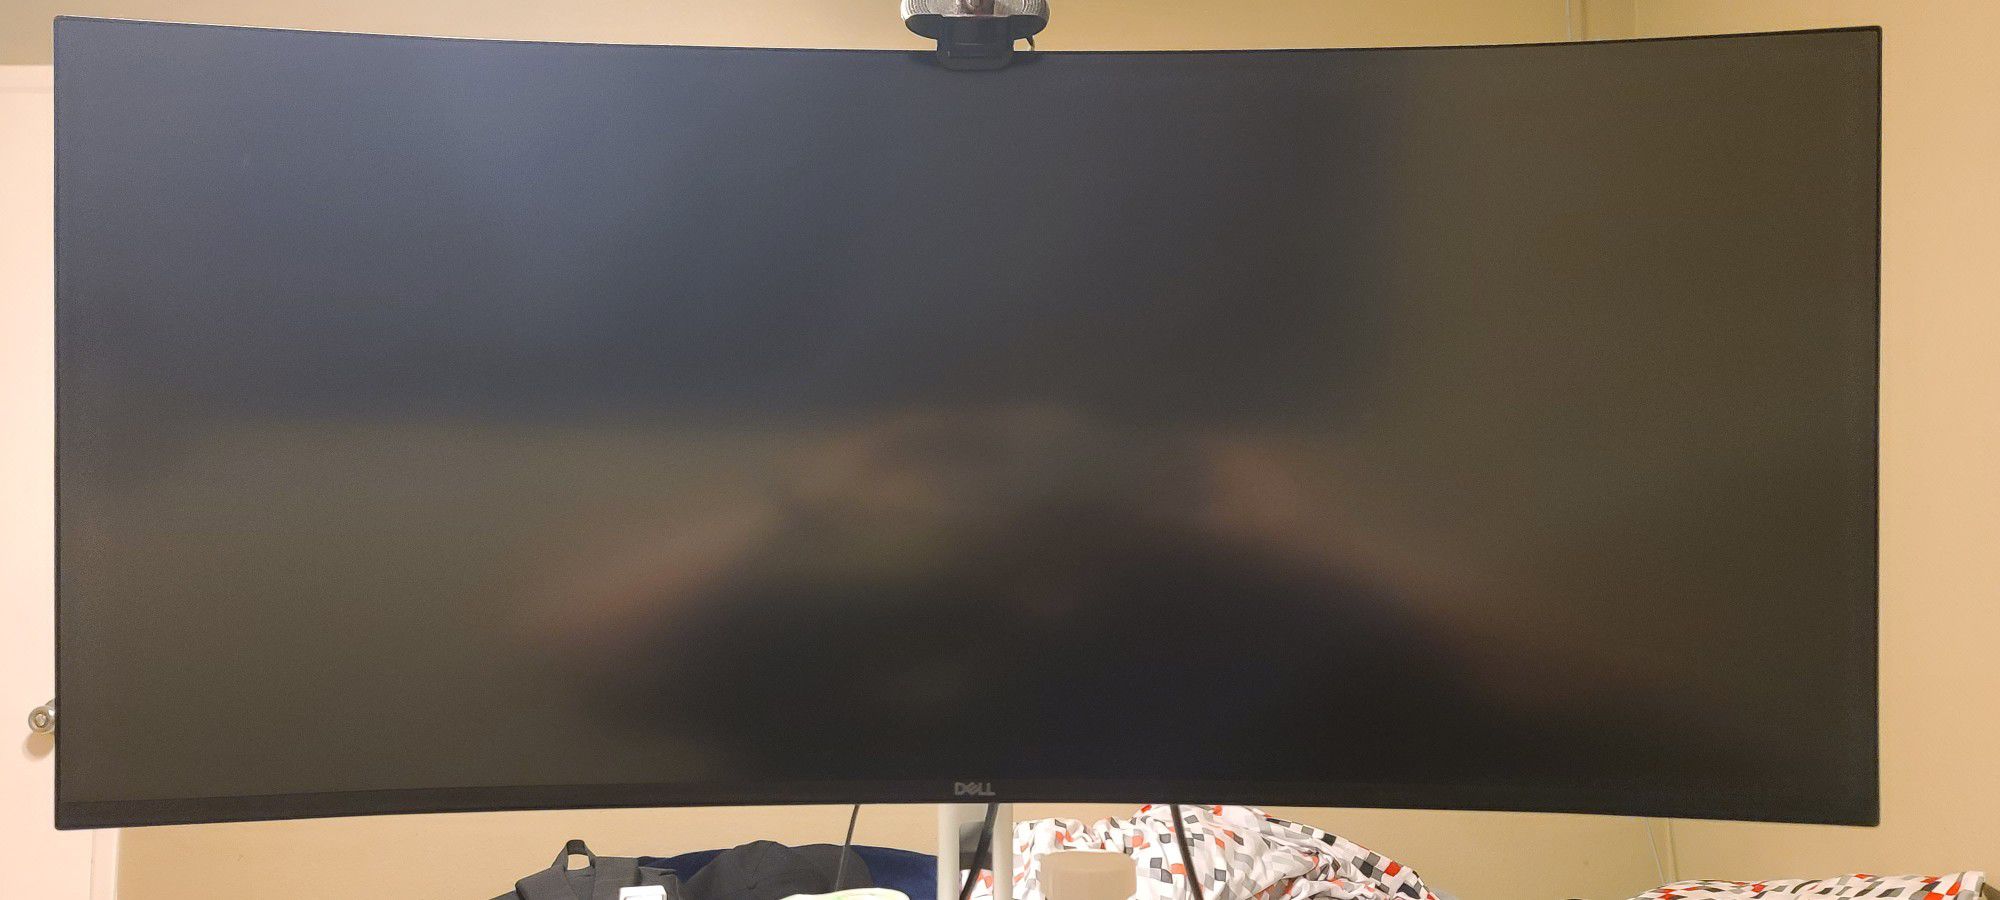 40 Inch Curve Monitor With Computer 